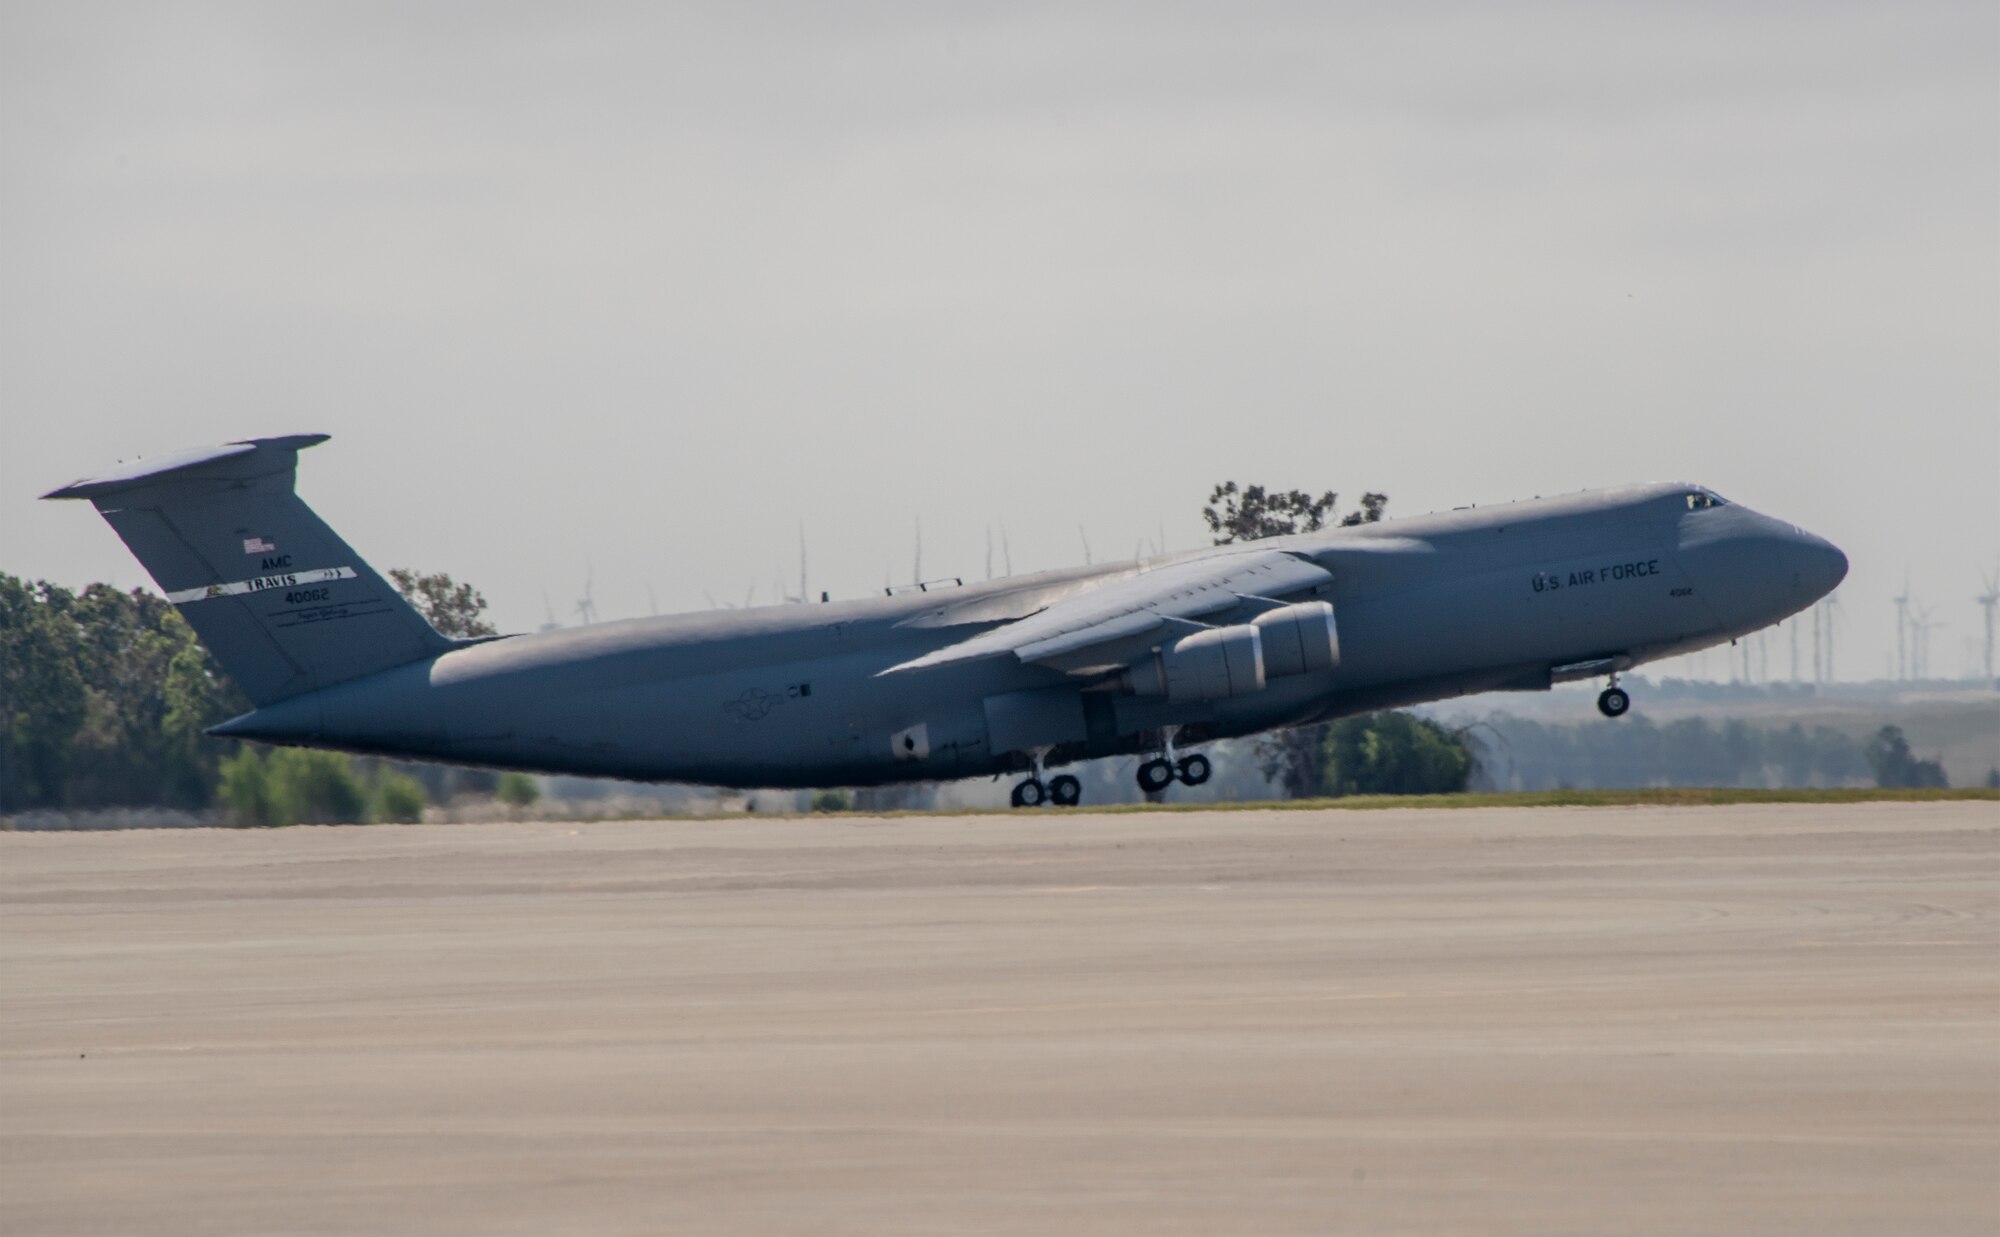 A U.S. Air Force C-5M Super Galaxy takes off during a readiness exercise at Travis Air Force Base, California, May 9, 2019. The base conducted a week-long exercise that evaluated Travis’ readiness and ability to execute and sustain rapid global mobility around the world. (U.S. Air Force photo by Heide Couch)